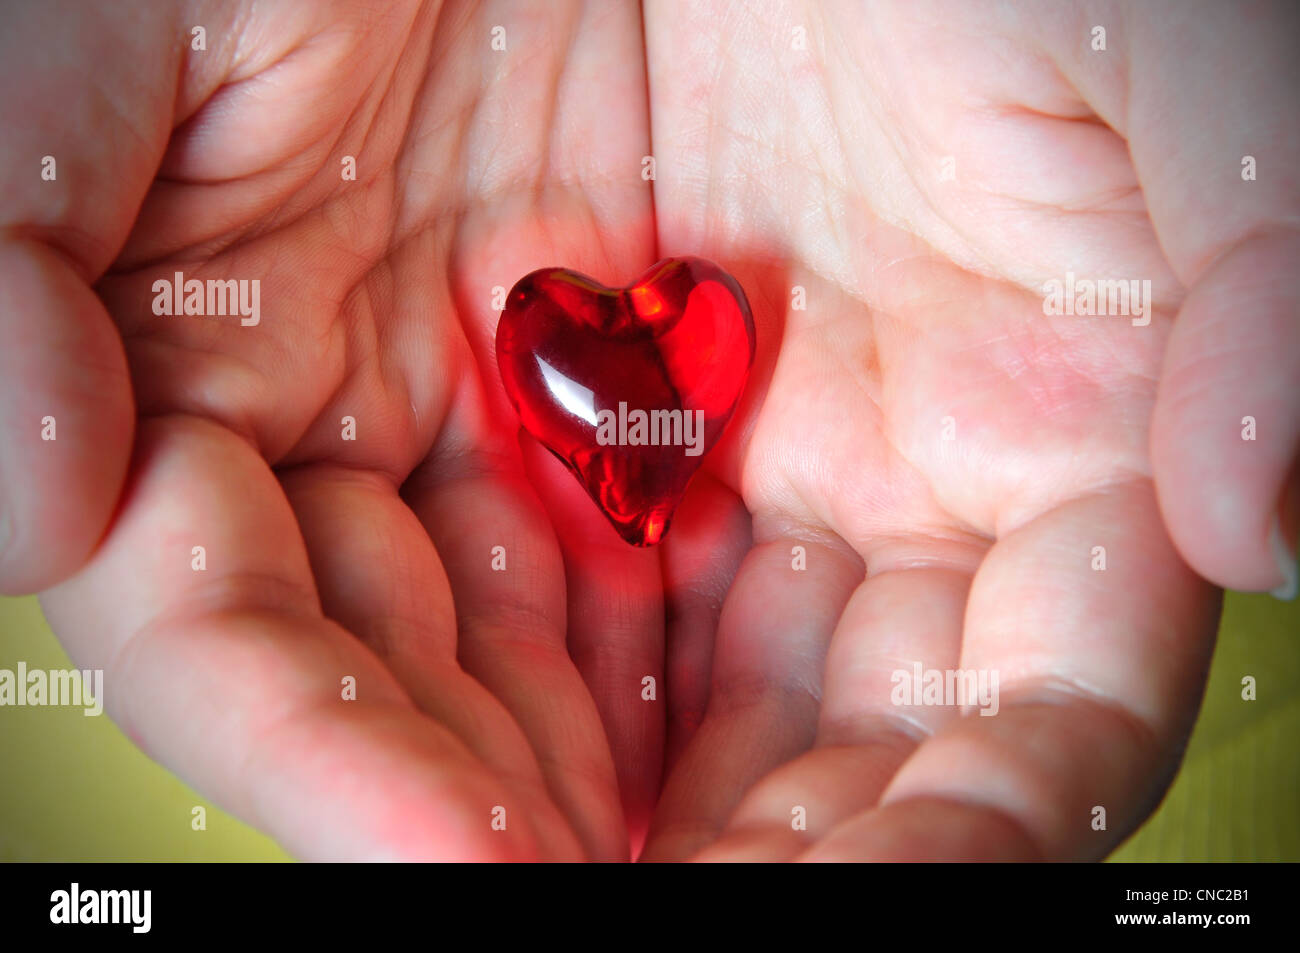 Glowing red heart hold on the palm of one's hands Stock Photo